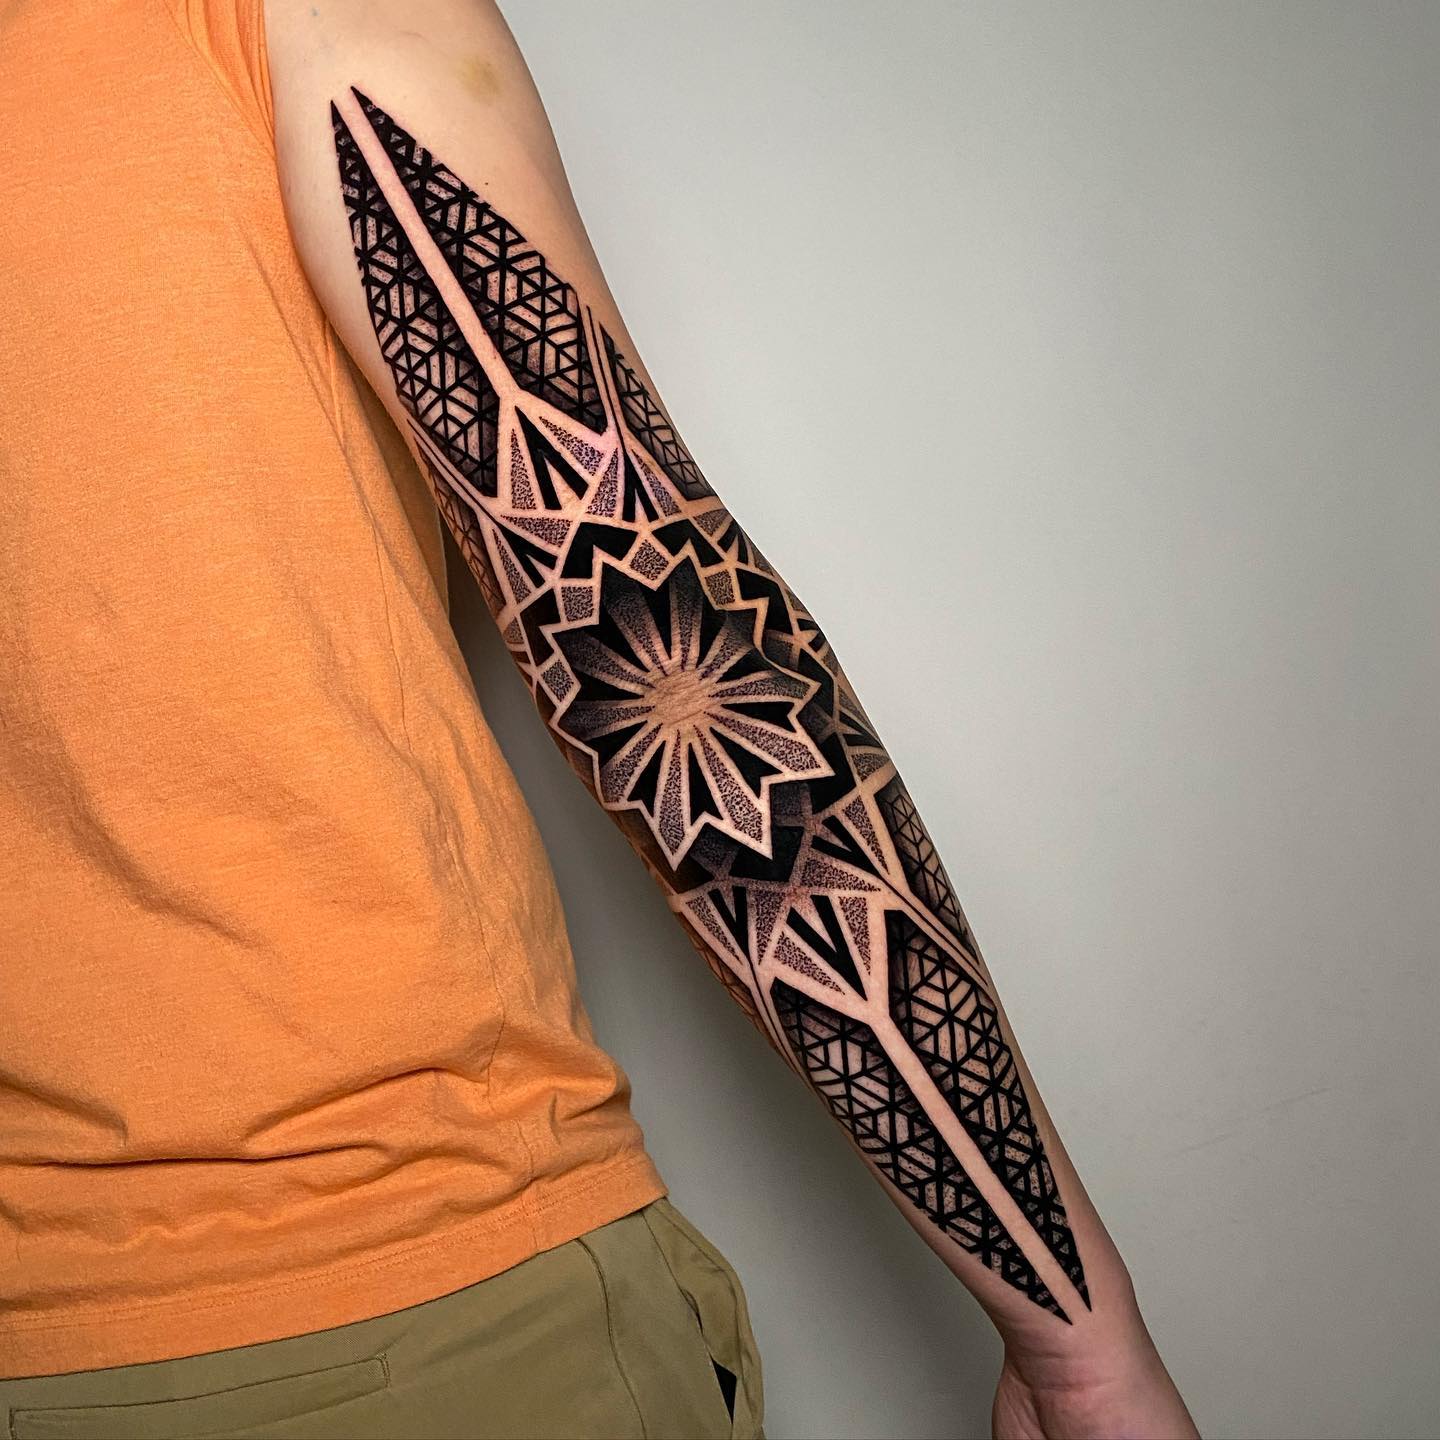 Heads up when it comes to this giant elbow mandala tattoo. It is a big and bold statement that one can go for. This type of tattoo will take several hours to do, so trust the process and pick out the best tattoo artist you know of.